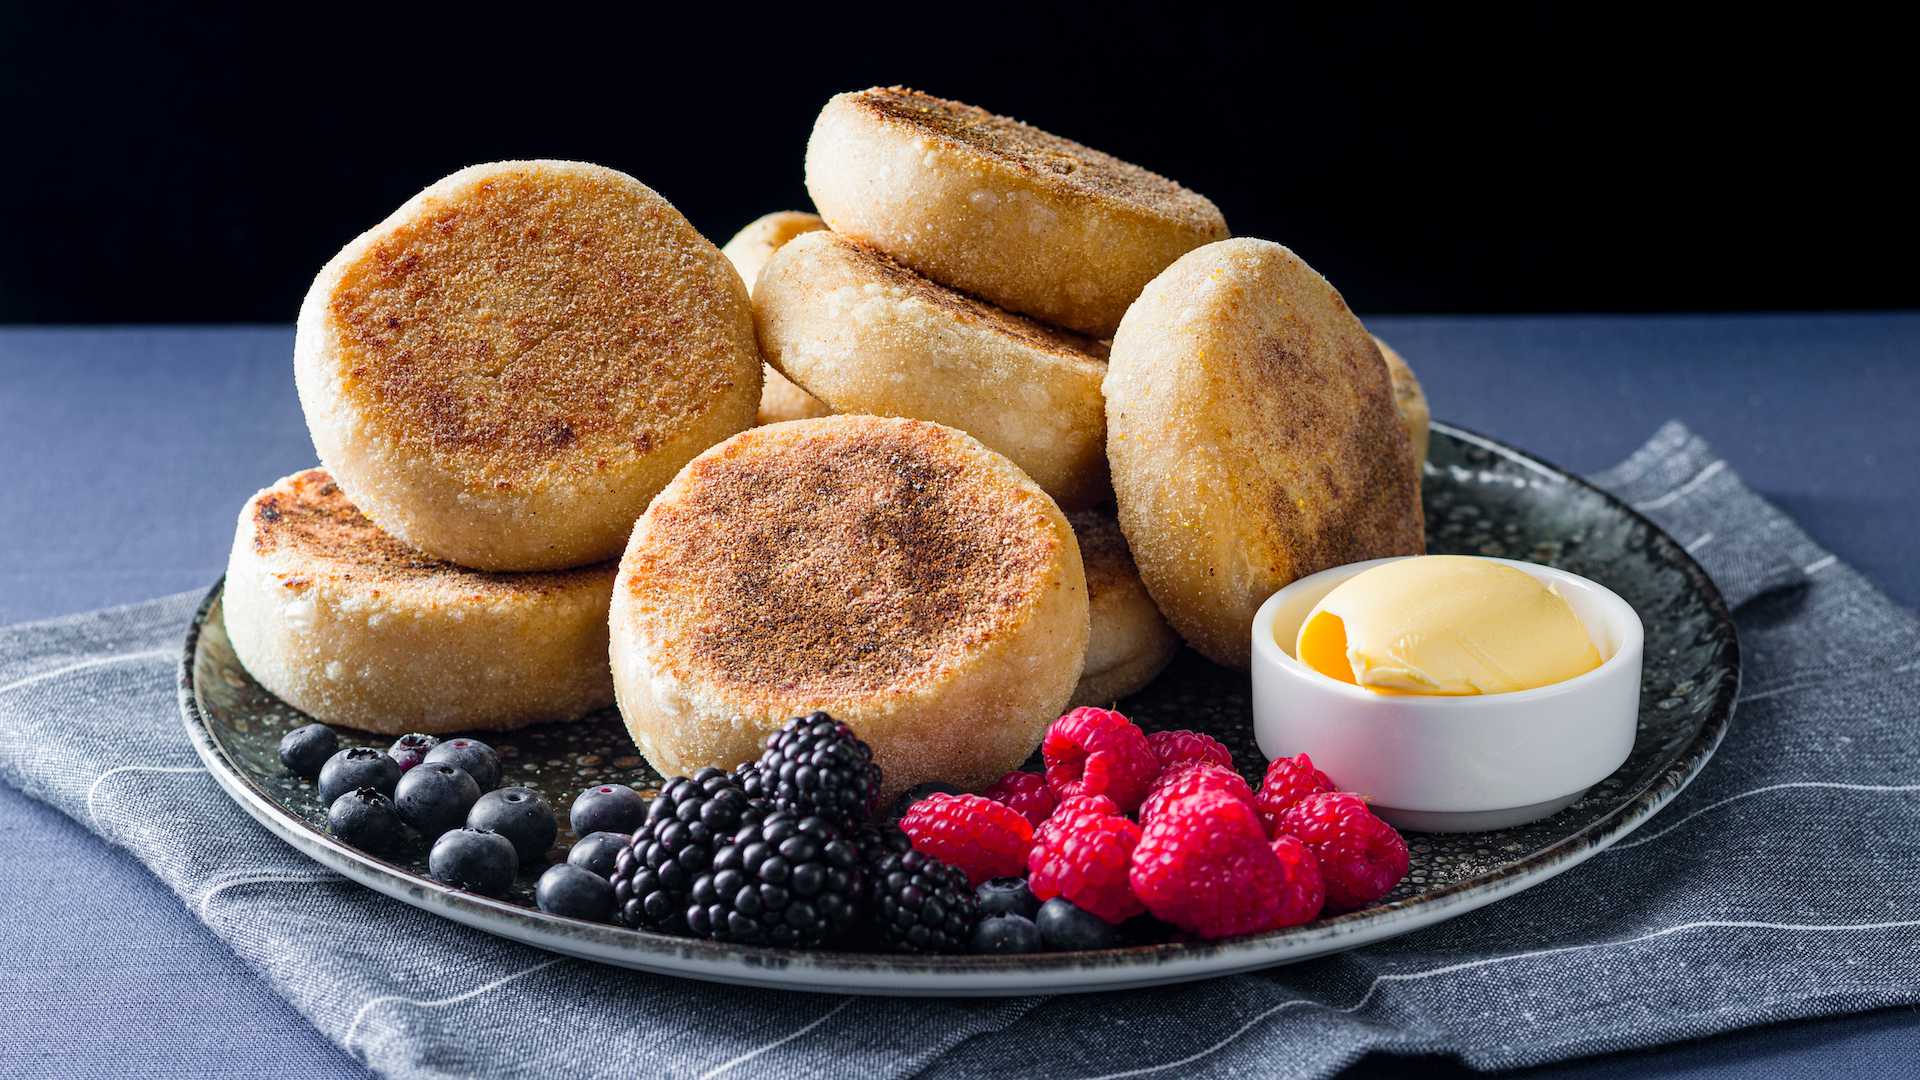 Black Star Pastry's Christopher Thé Has Launched a New Range of Crumpets and English Muffins